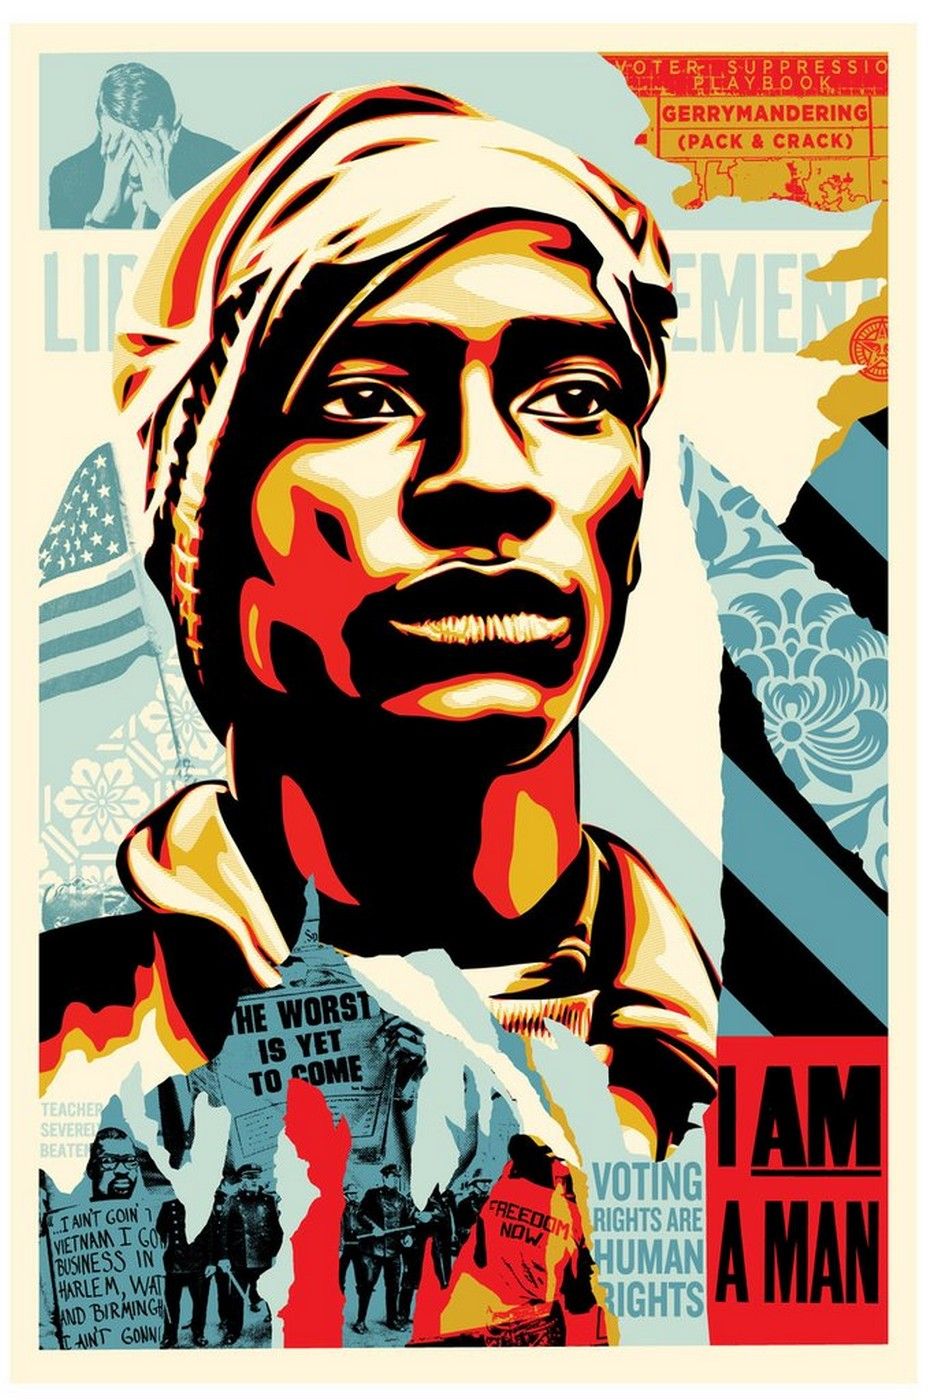 Shepard FAIREY Shepard FAIREY (Obey)

Voting rights are human rights

Impression&hellip;